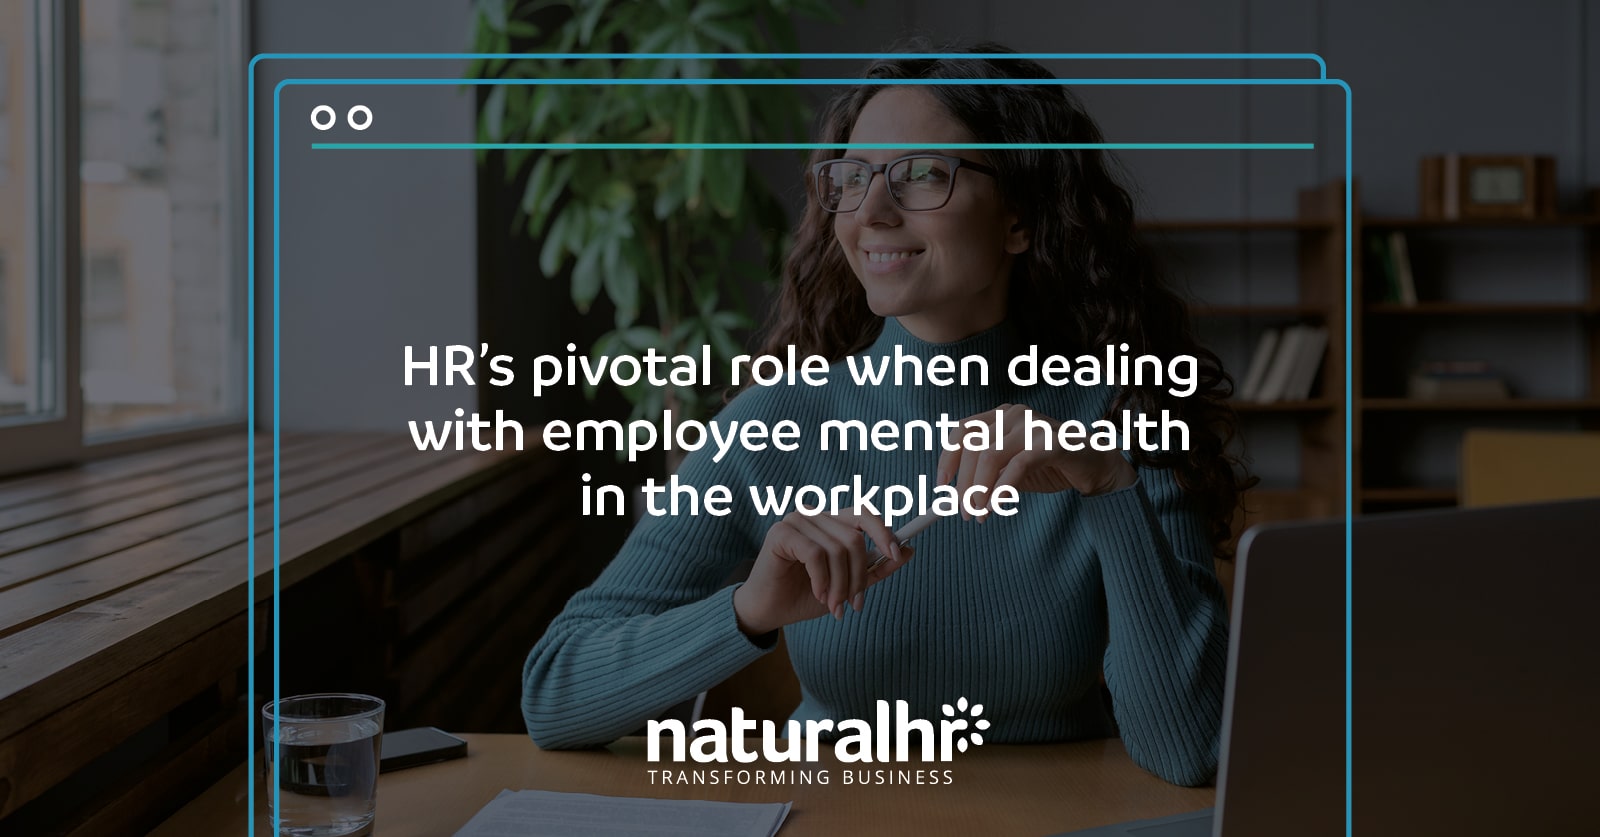 HR's role when dealing with employee mental health in the workplace